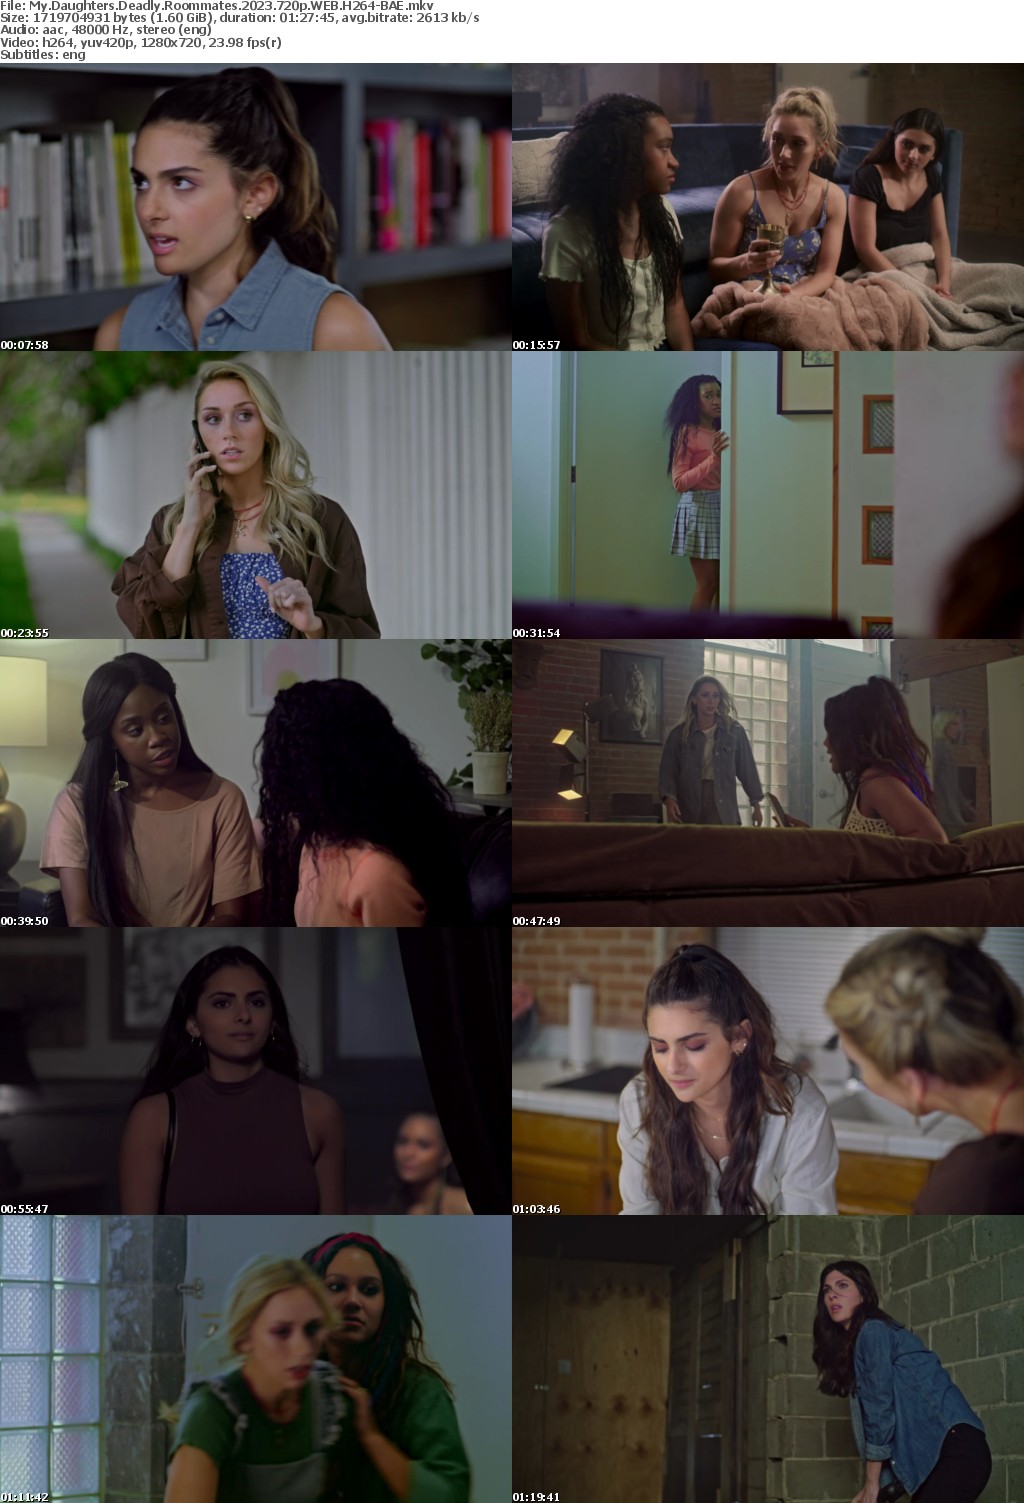 My Daughters Deadly Roommates 2023 720p WEB H264-BAE